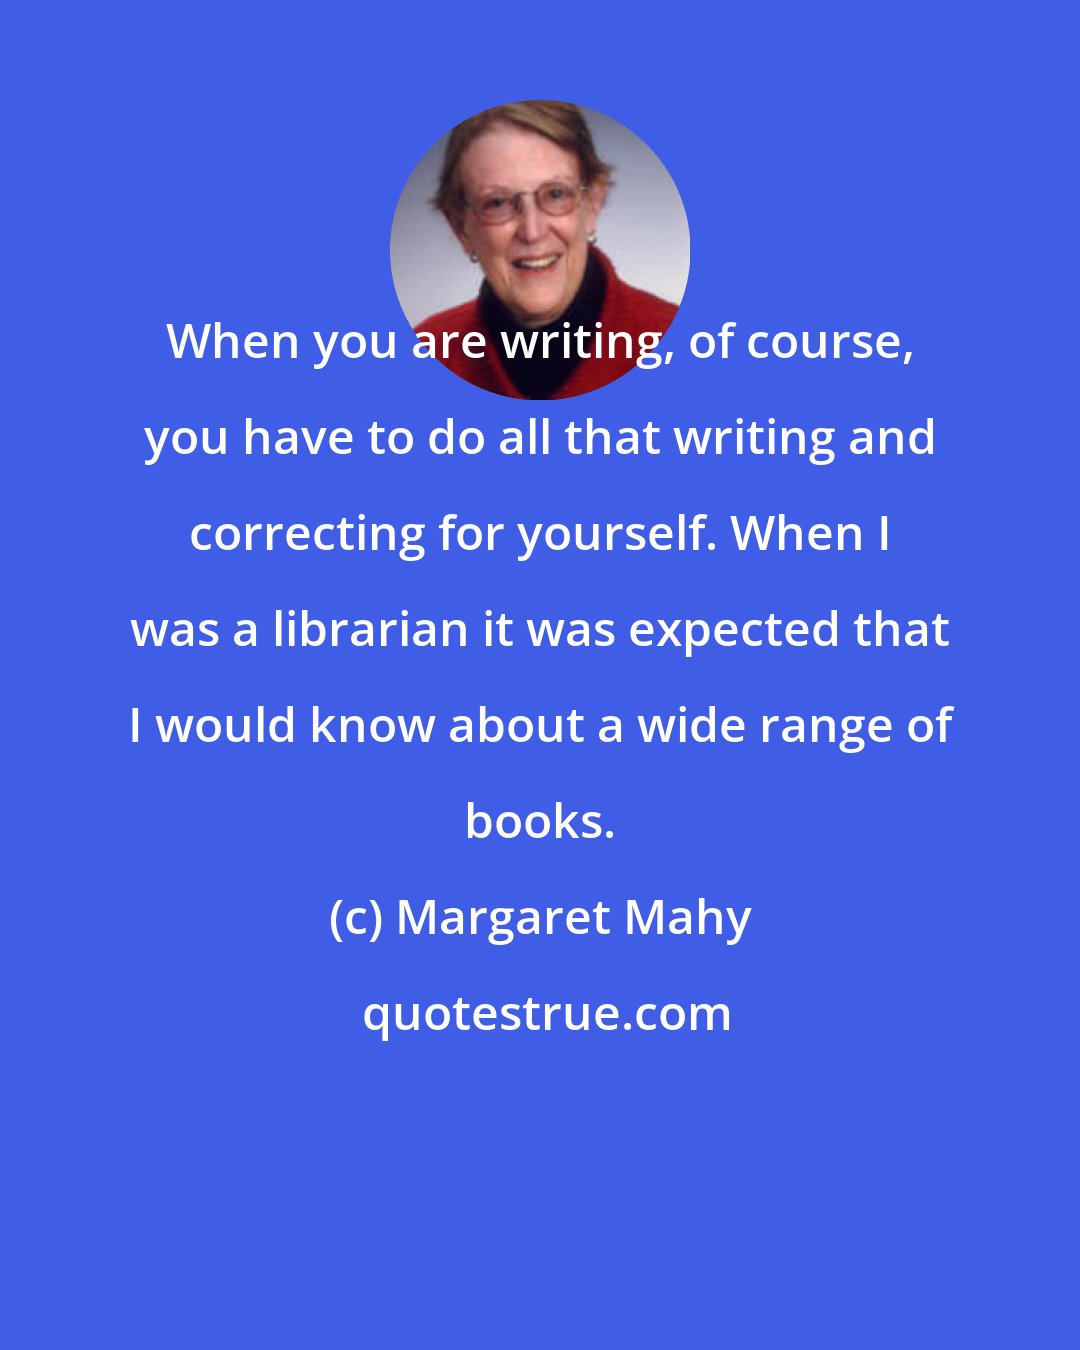 Margaret Mahy: When you are writing, of course, you have to do all that writing and correcting for yourself. When I was a librarian it was expected that I would know about a wide range of books.